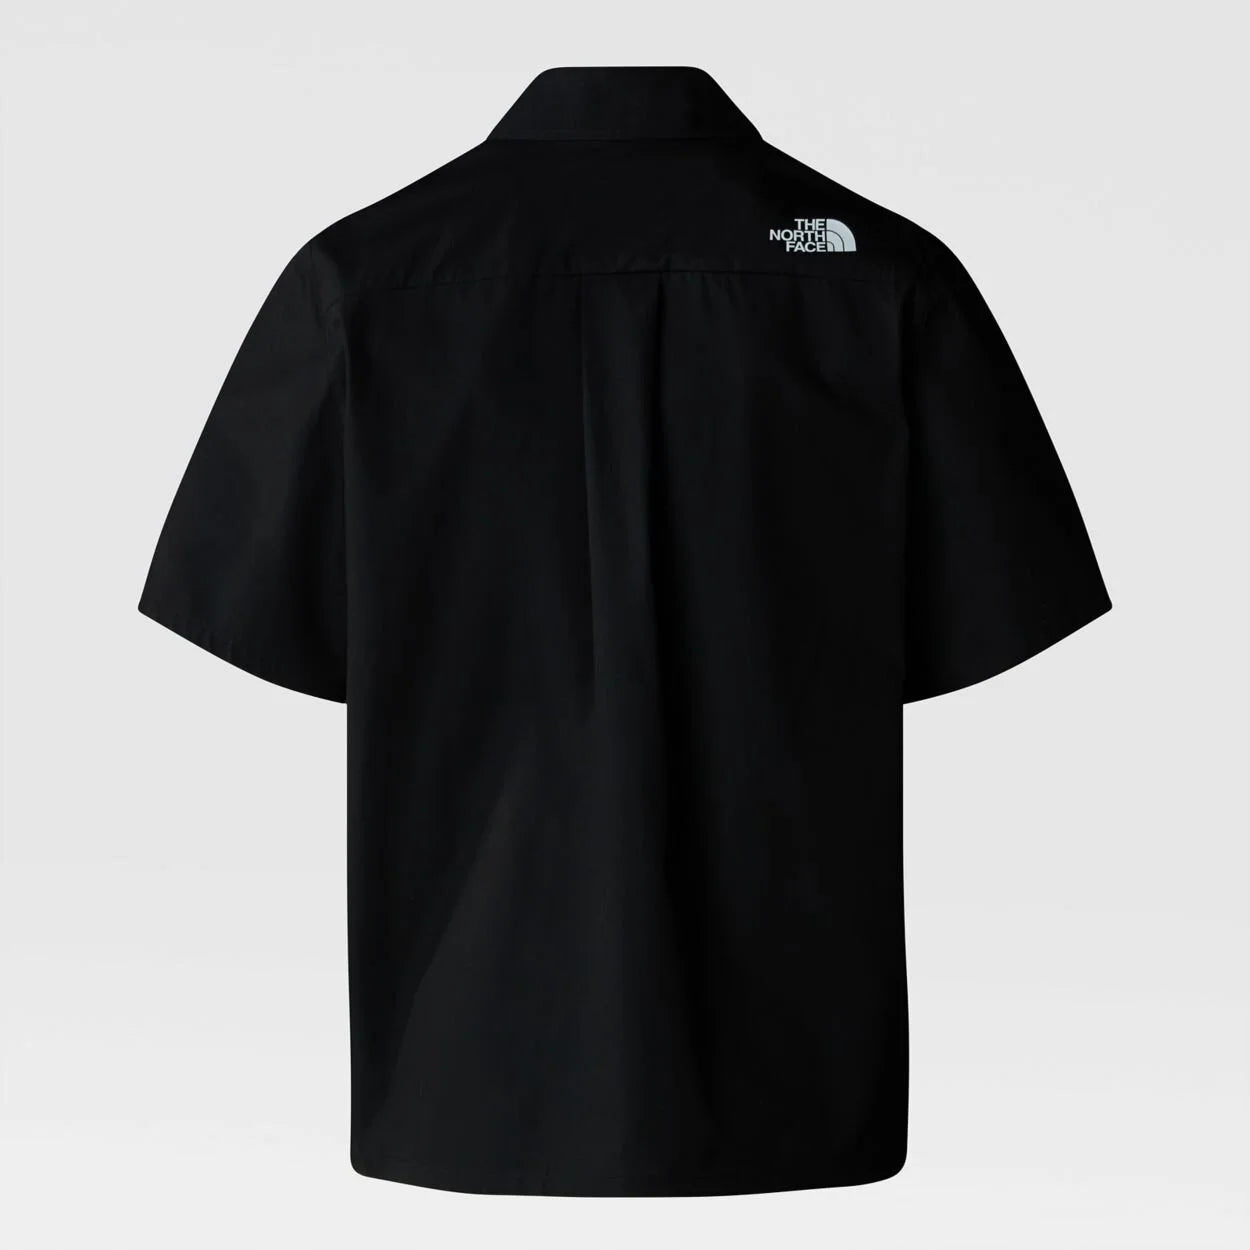 THE NORTH FACE - BOXY FIT SHIRT